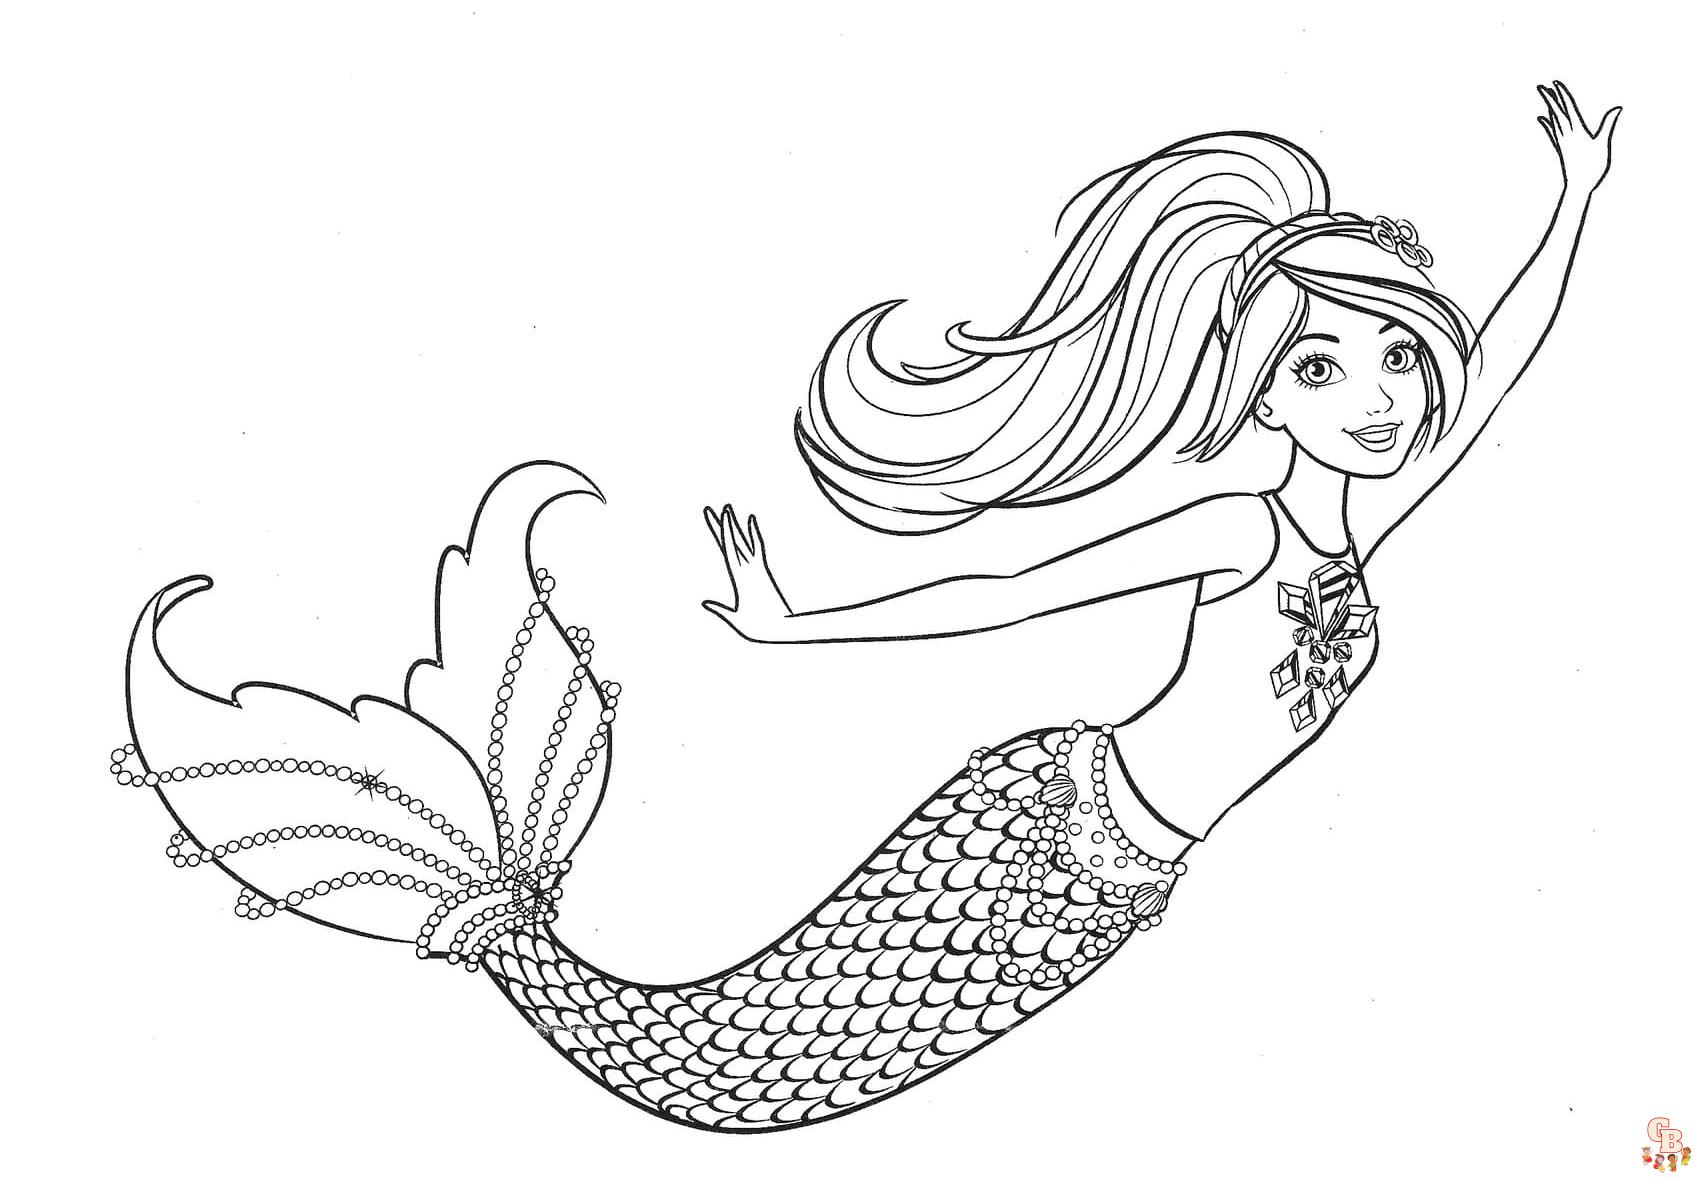 Printable mythical creatures coloring pages free